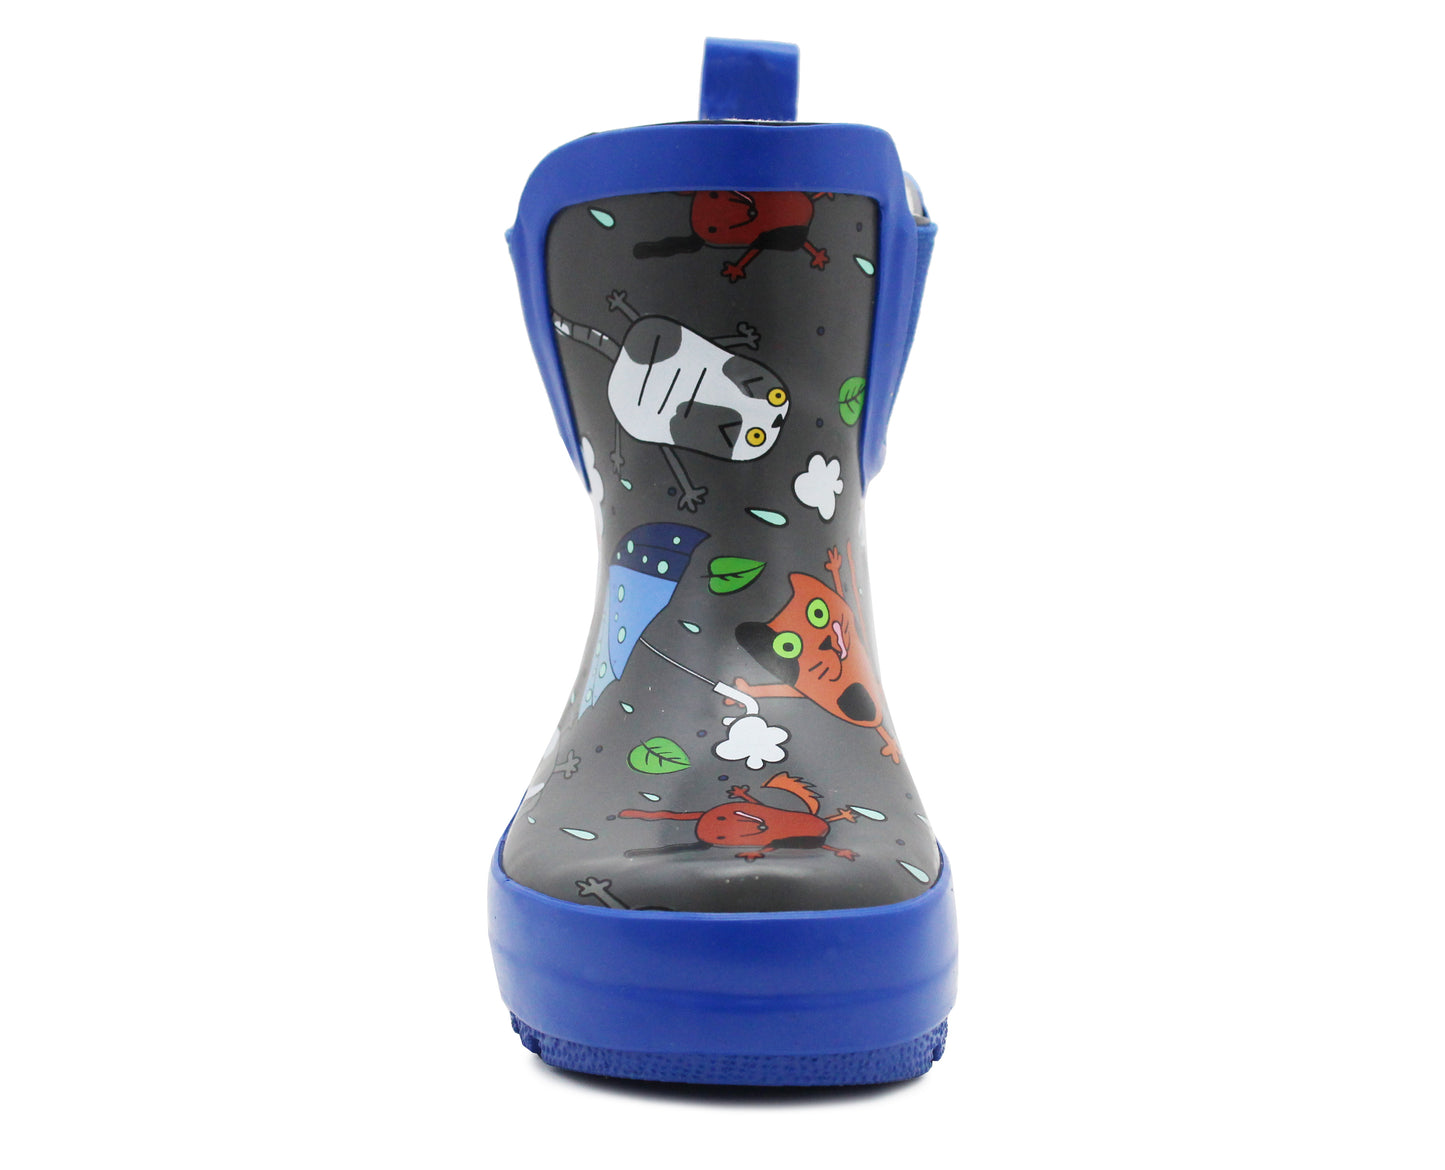 Boys Kids Wellington Boots Toddlers Infant Ankle Boot Wellies Elastic Waterproof Puddle Rain Boots